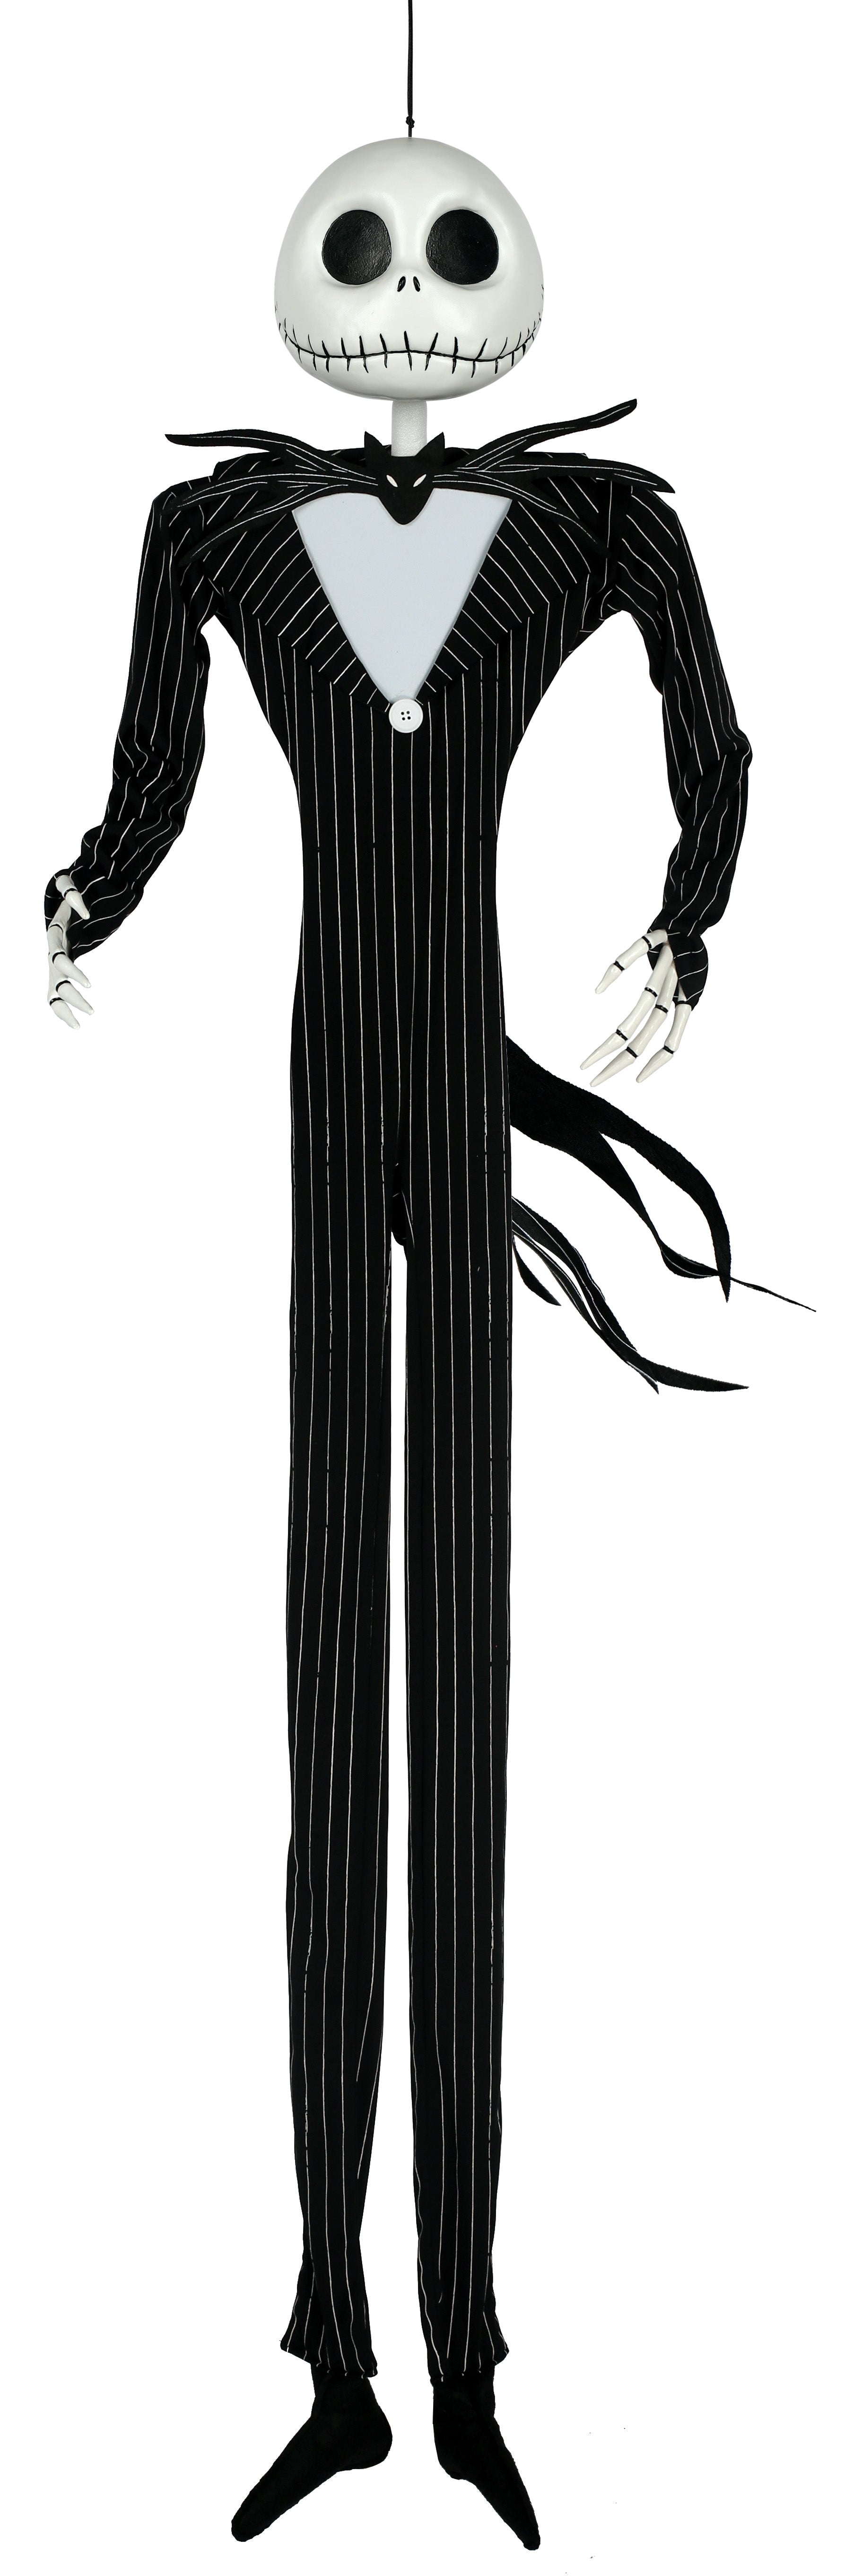 6 Foot The Nightmare Before Christmas Jack Skellington Poseable Character Prop - costumes.com